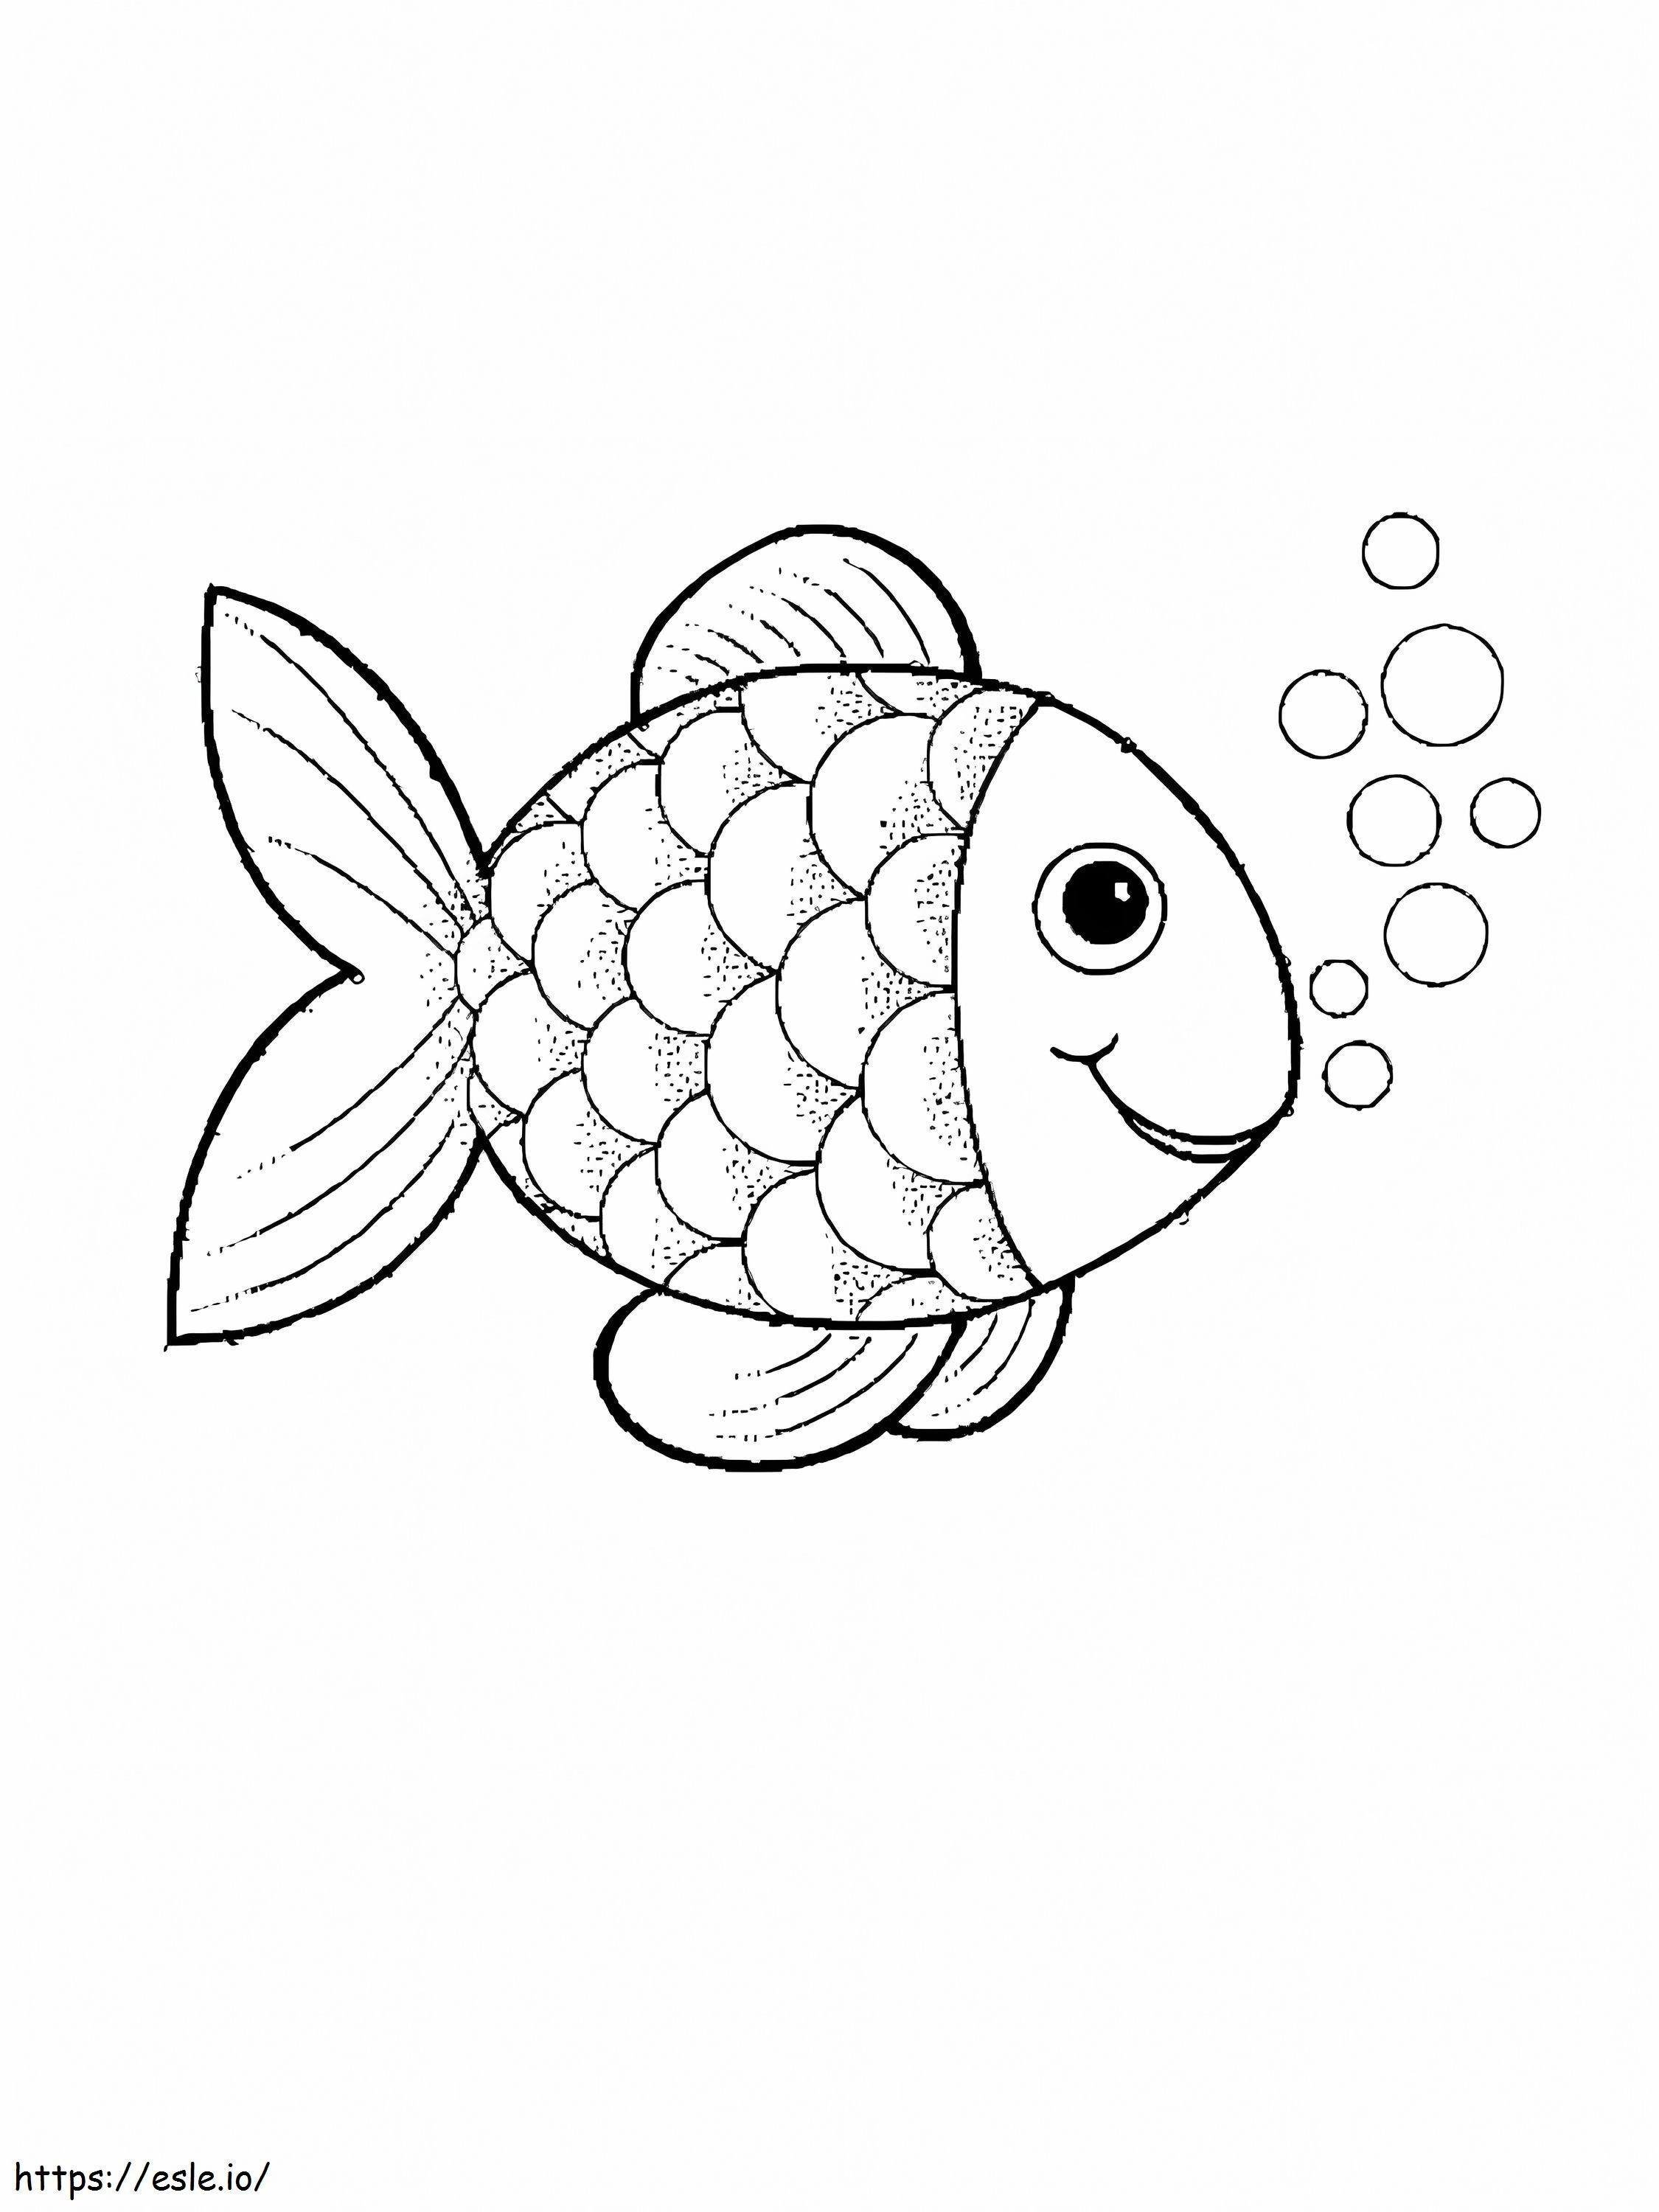 Smiling Rainbow Fish coloring page